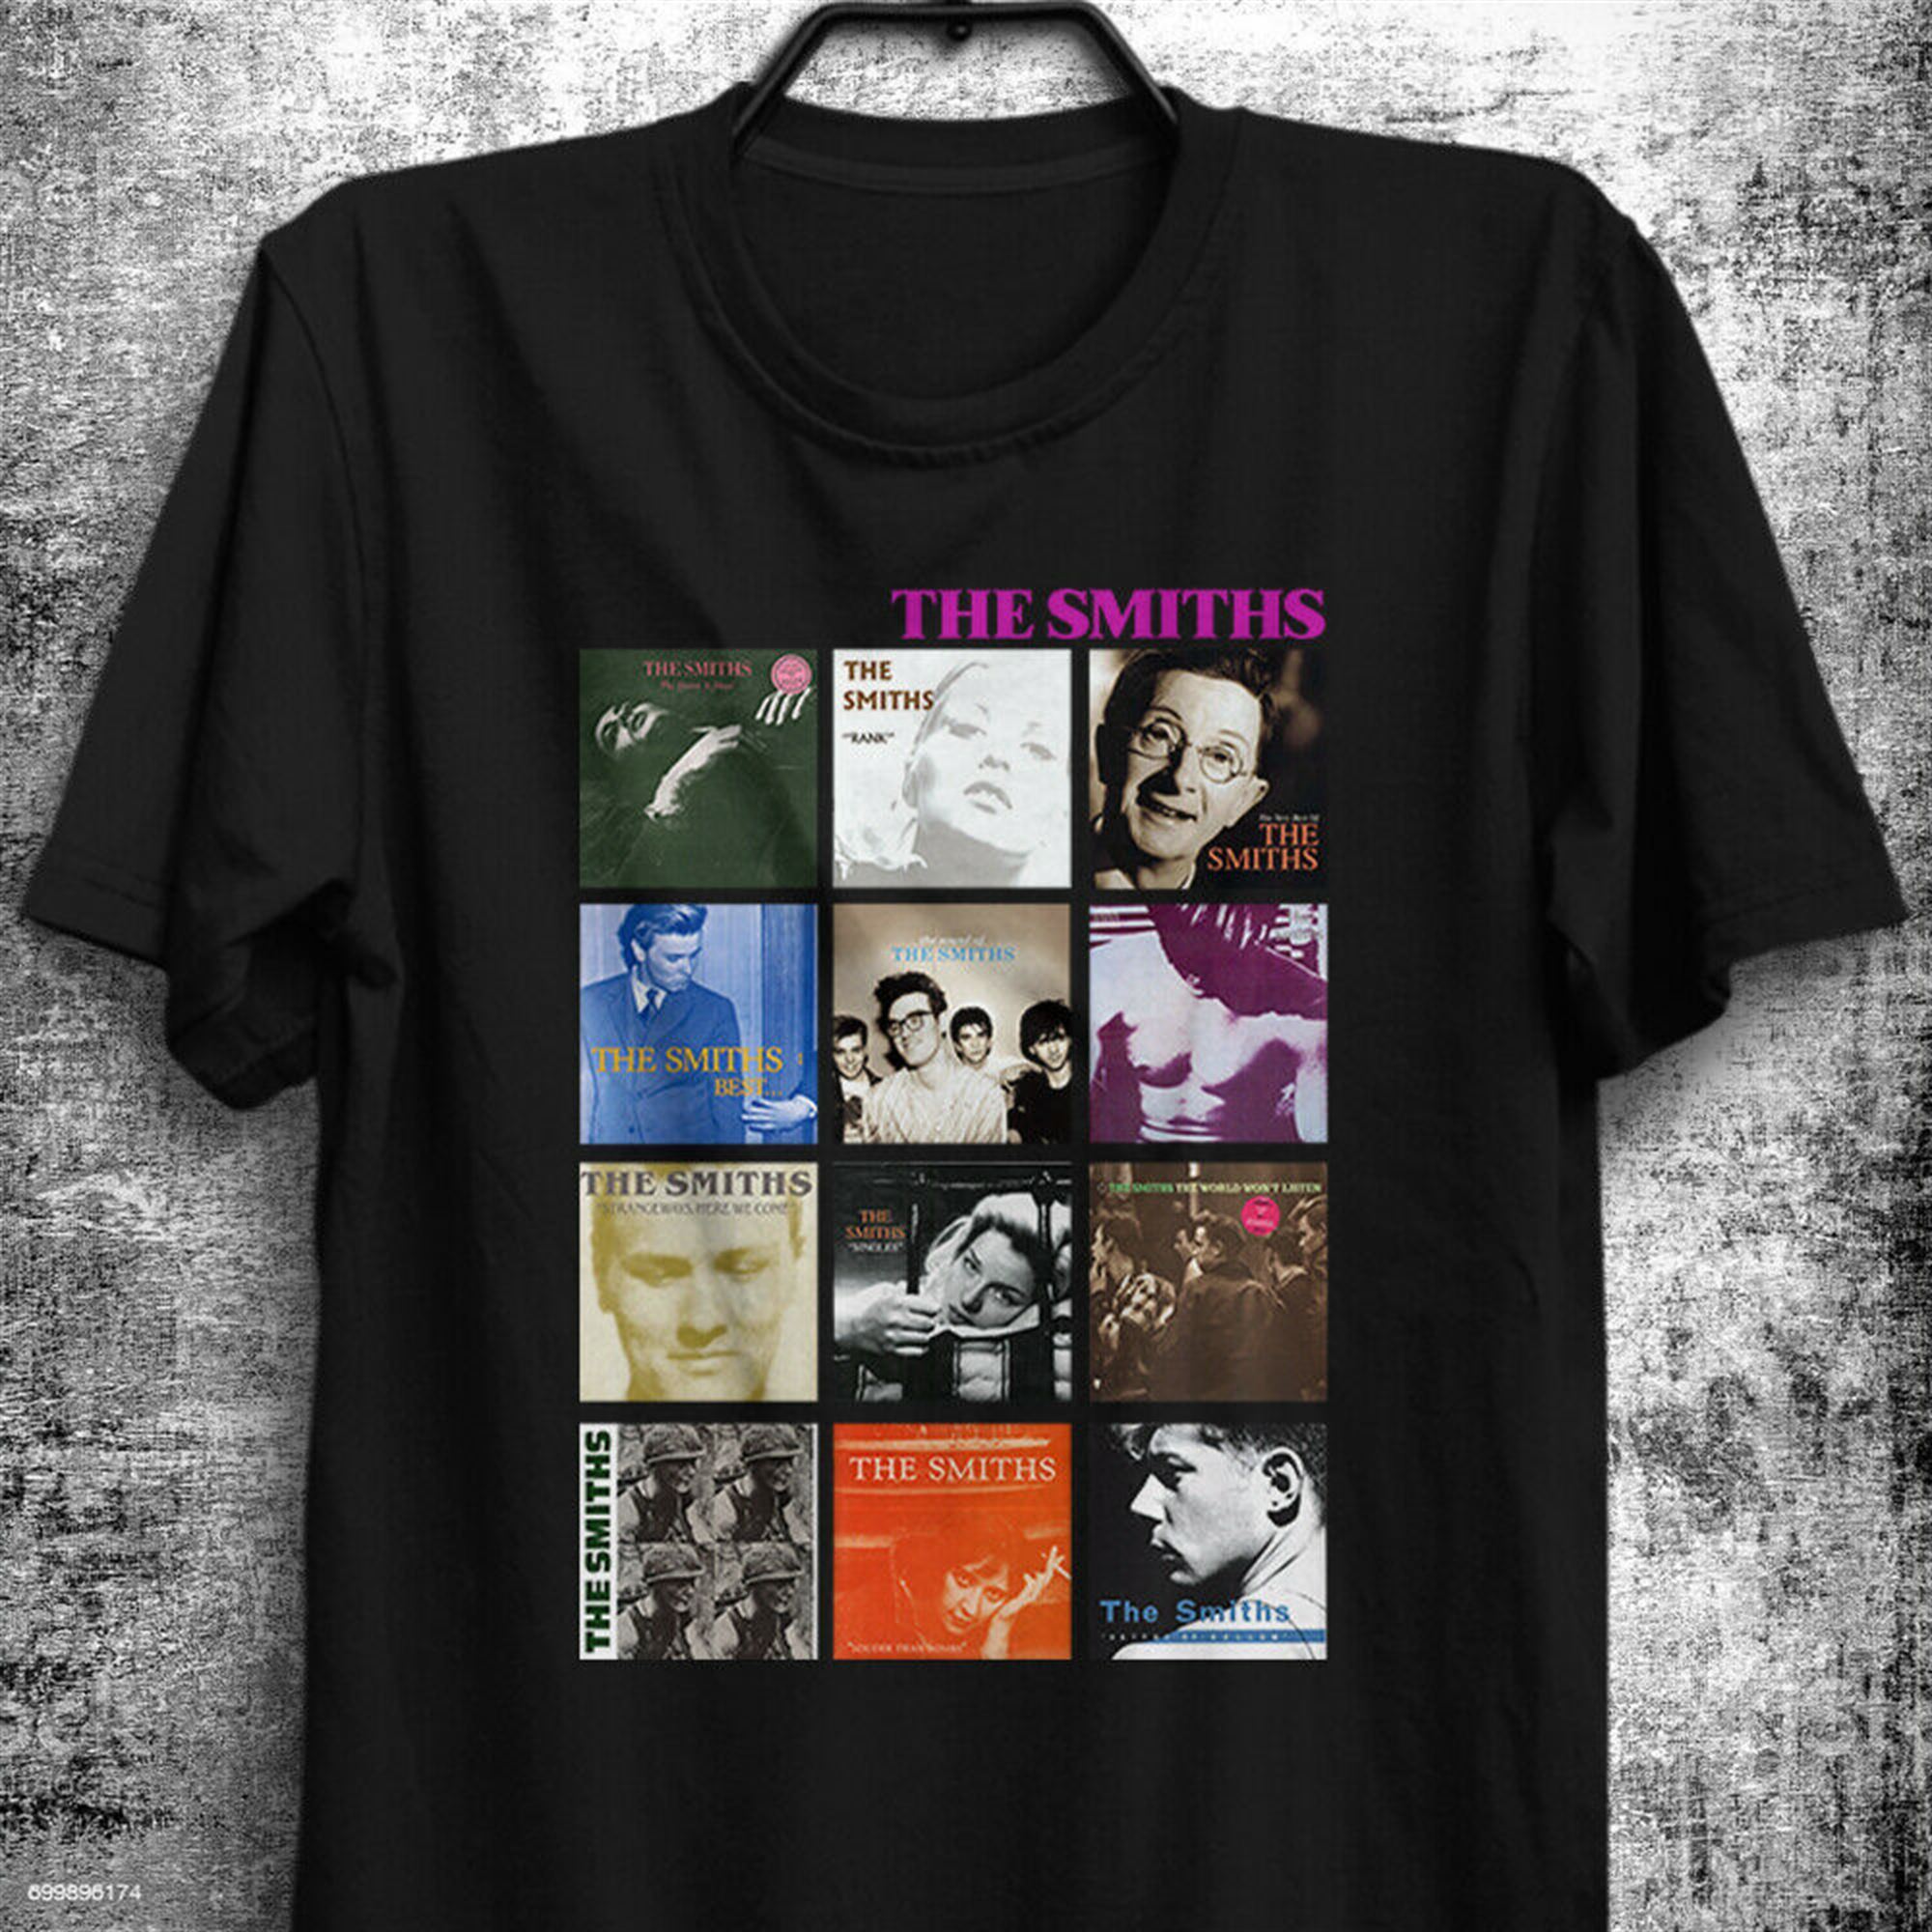 The Best Of The Smiths English Rock Band Morrissey Album Collections T-shirt